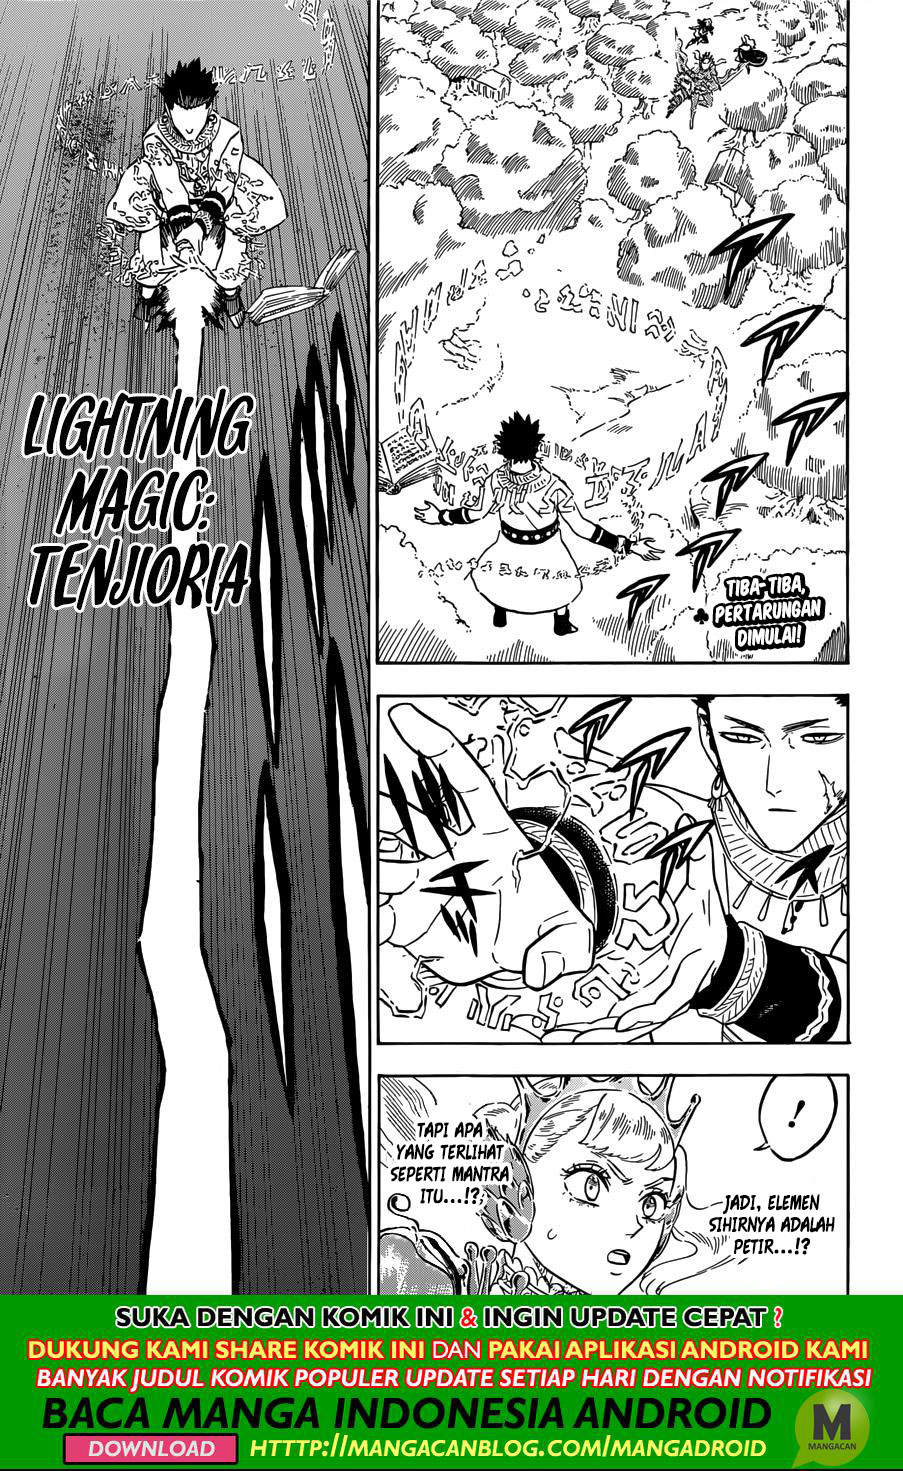 Black Clover: Chapter 226 - Page 1